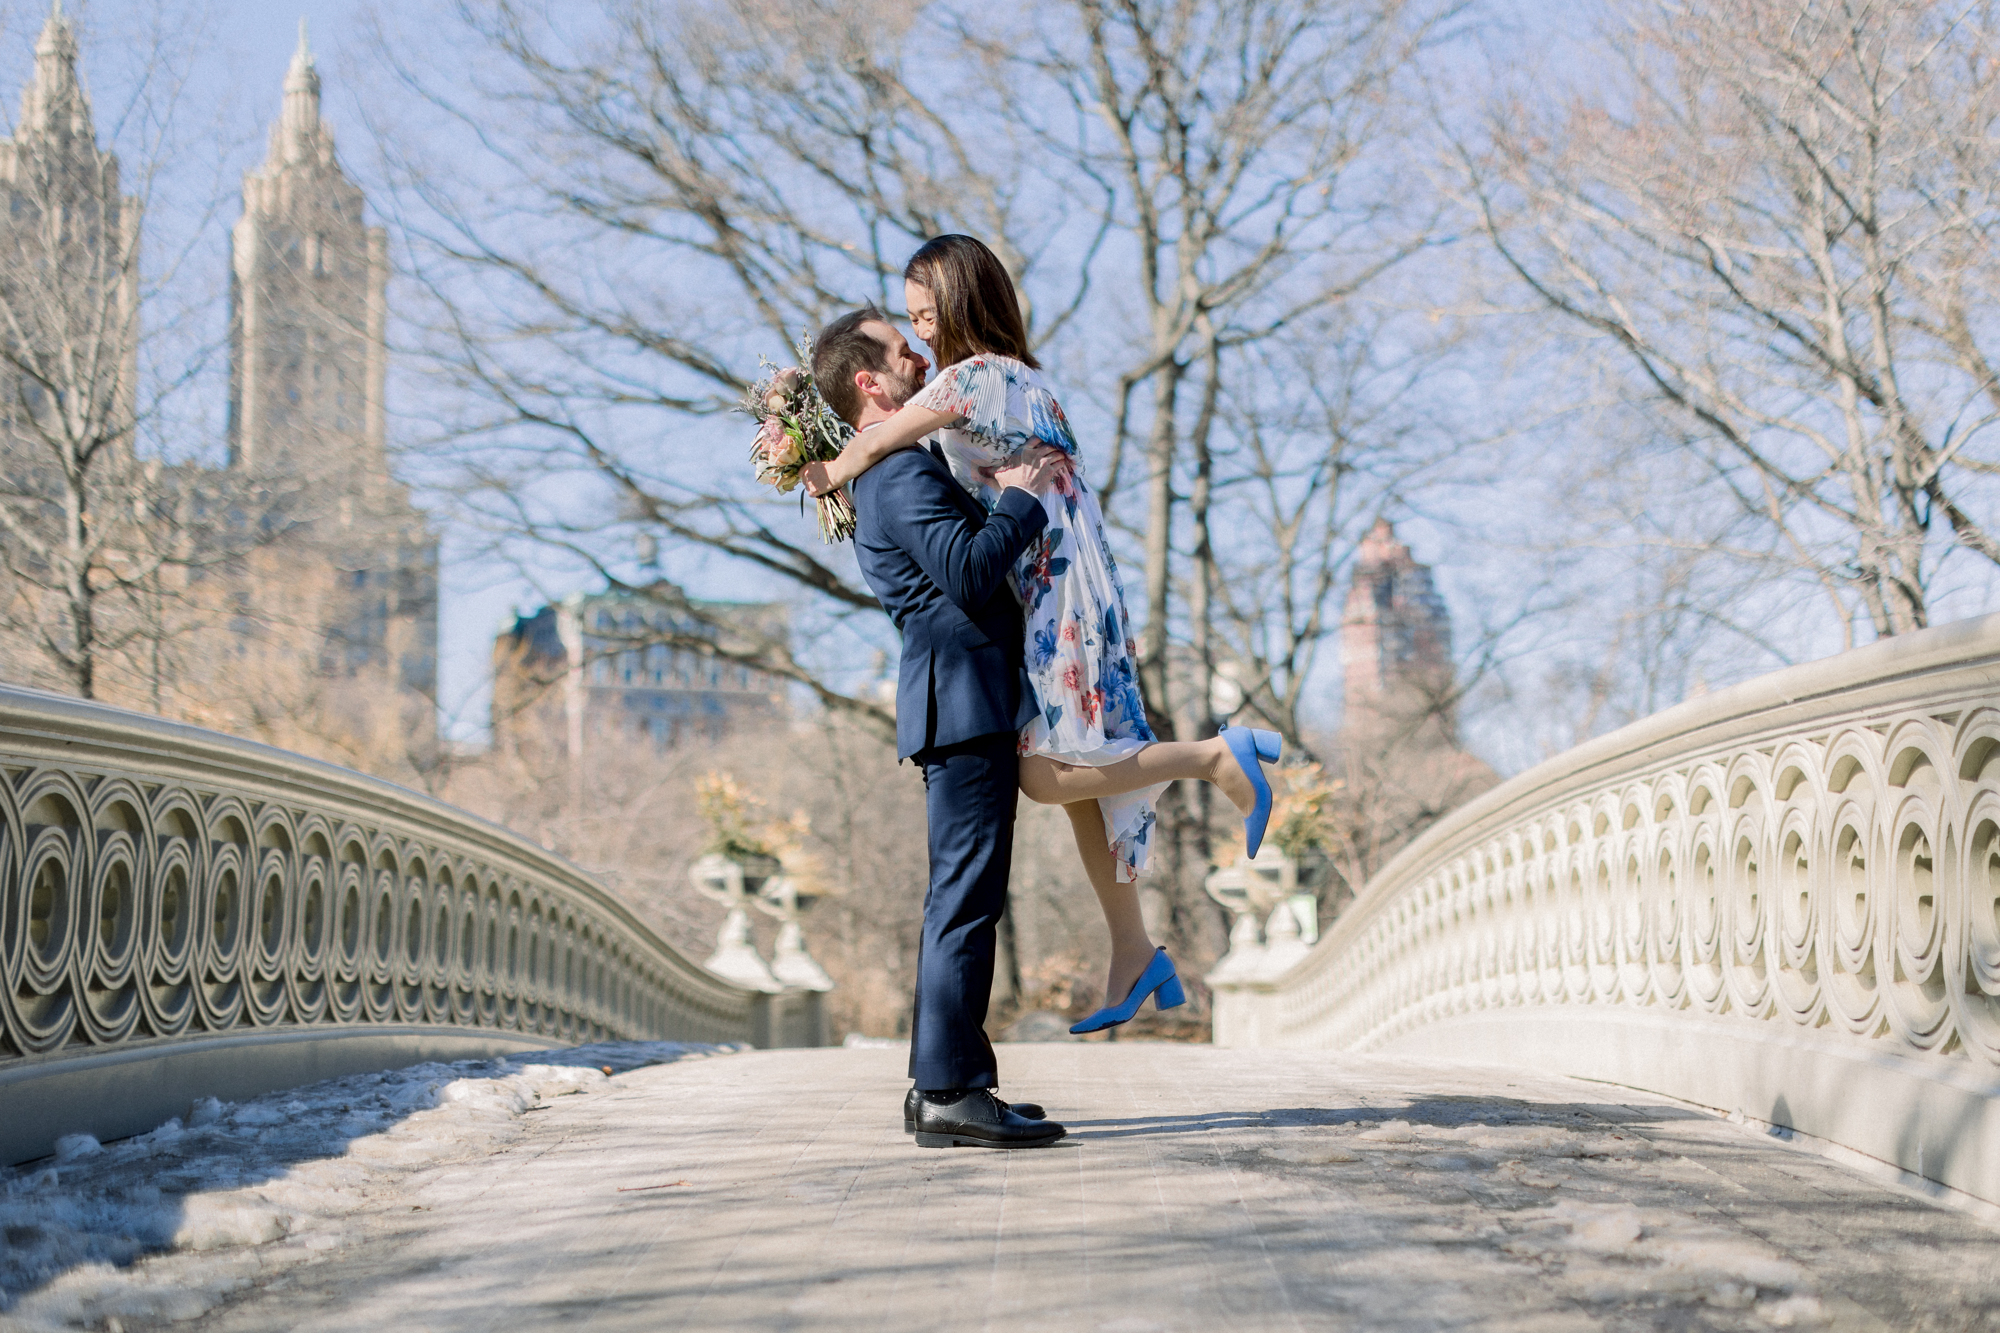 Candid Central Park Wedding Photos in Wintery NYC